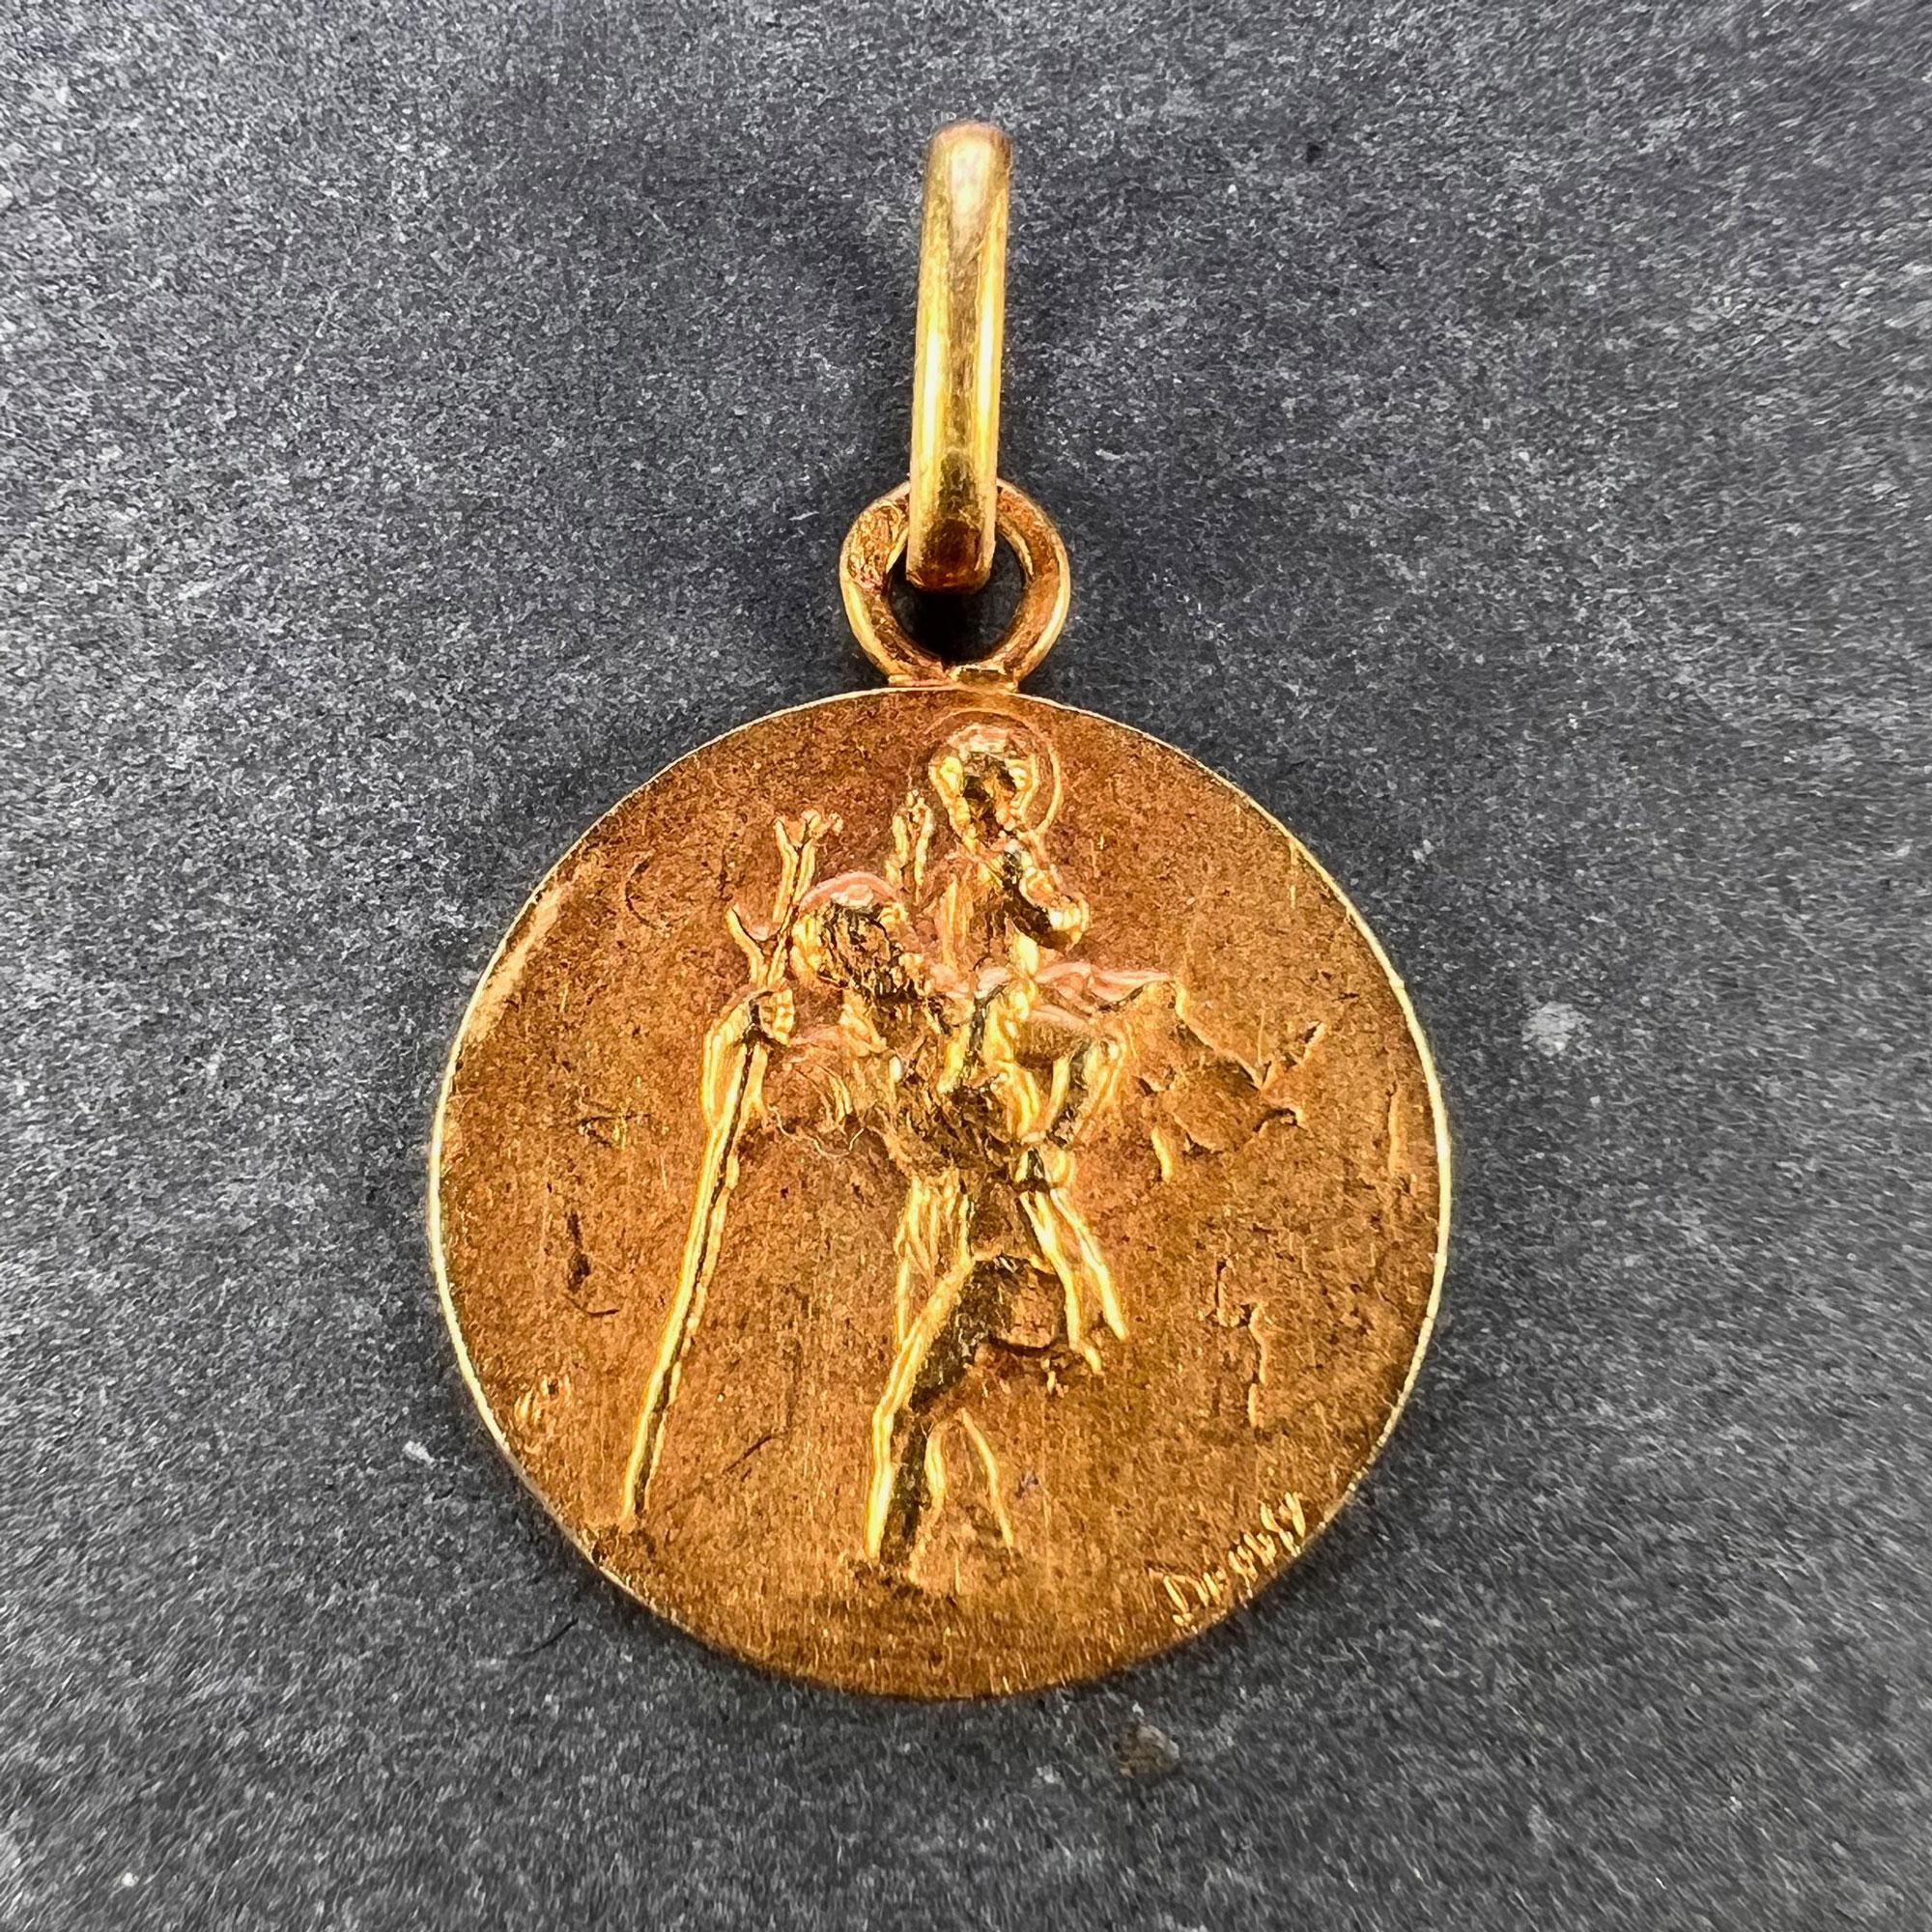 A French 18 karat (18K) yellow gold charm pendant designed as a disc representing Saint Christopher carrying the infant Christ. The reverse depicts a vintage car with the phrase 'Regarde Saint Christophe et va t'en rassure'. Engraved with the